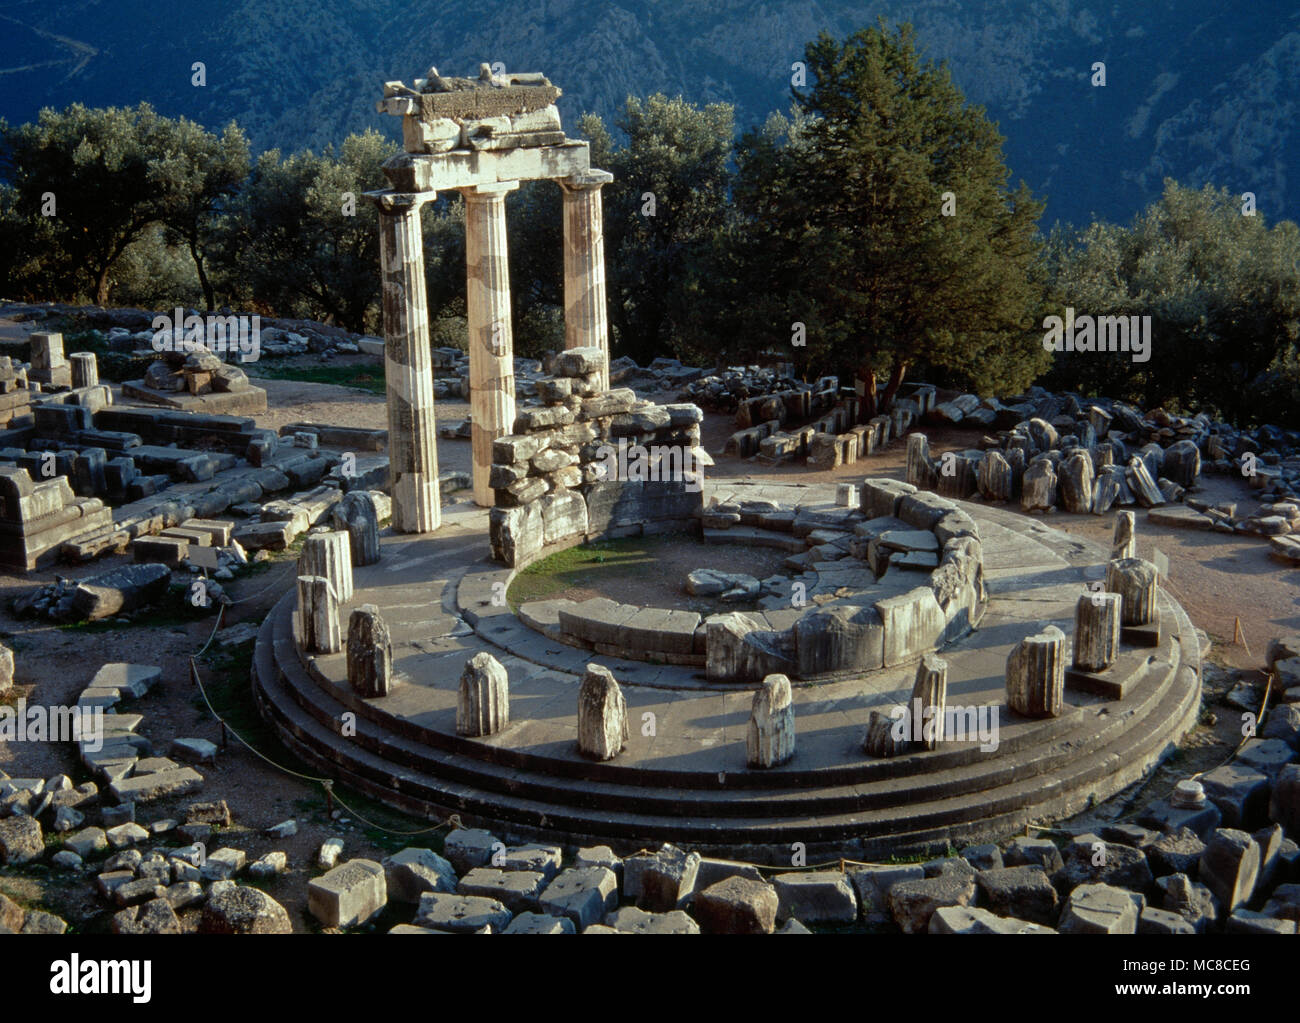 Greece. Sanctuary of the Athena Pronaia in Delphi. Tholos. Circular temple. 4th century BC. Remains of the three reconstructed Doric columns of the tholos. Stock Photo